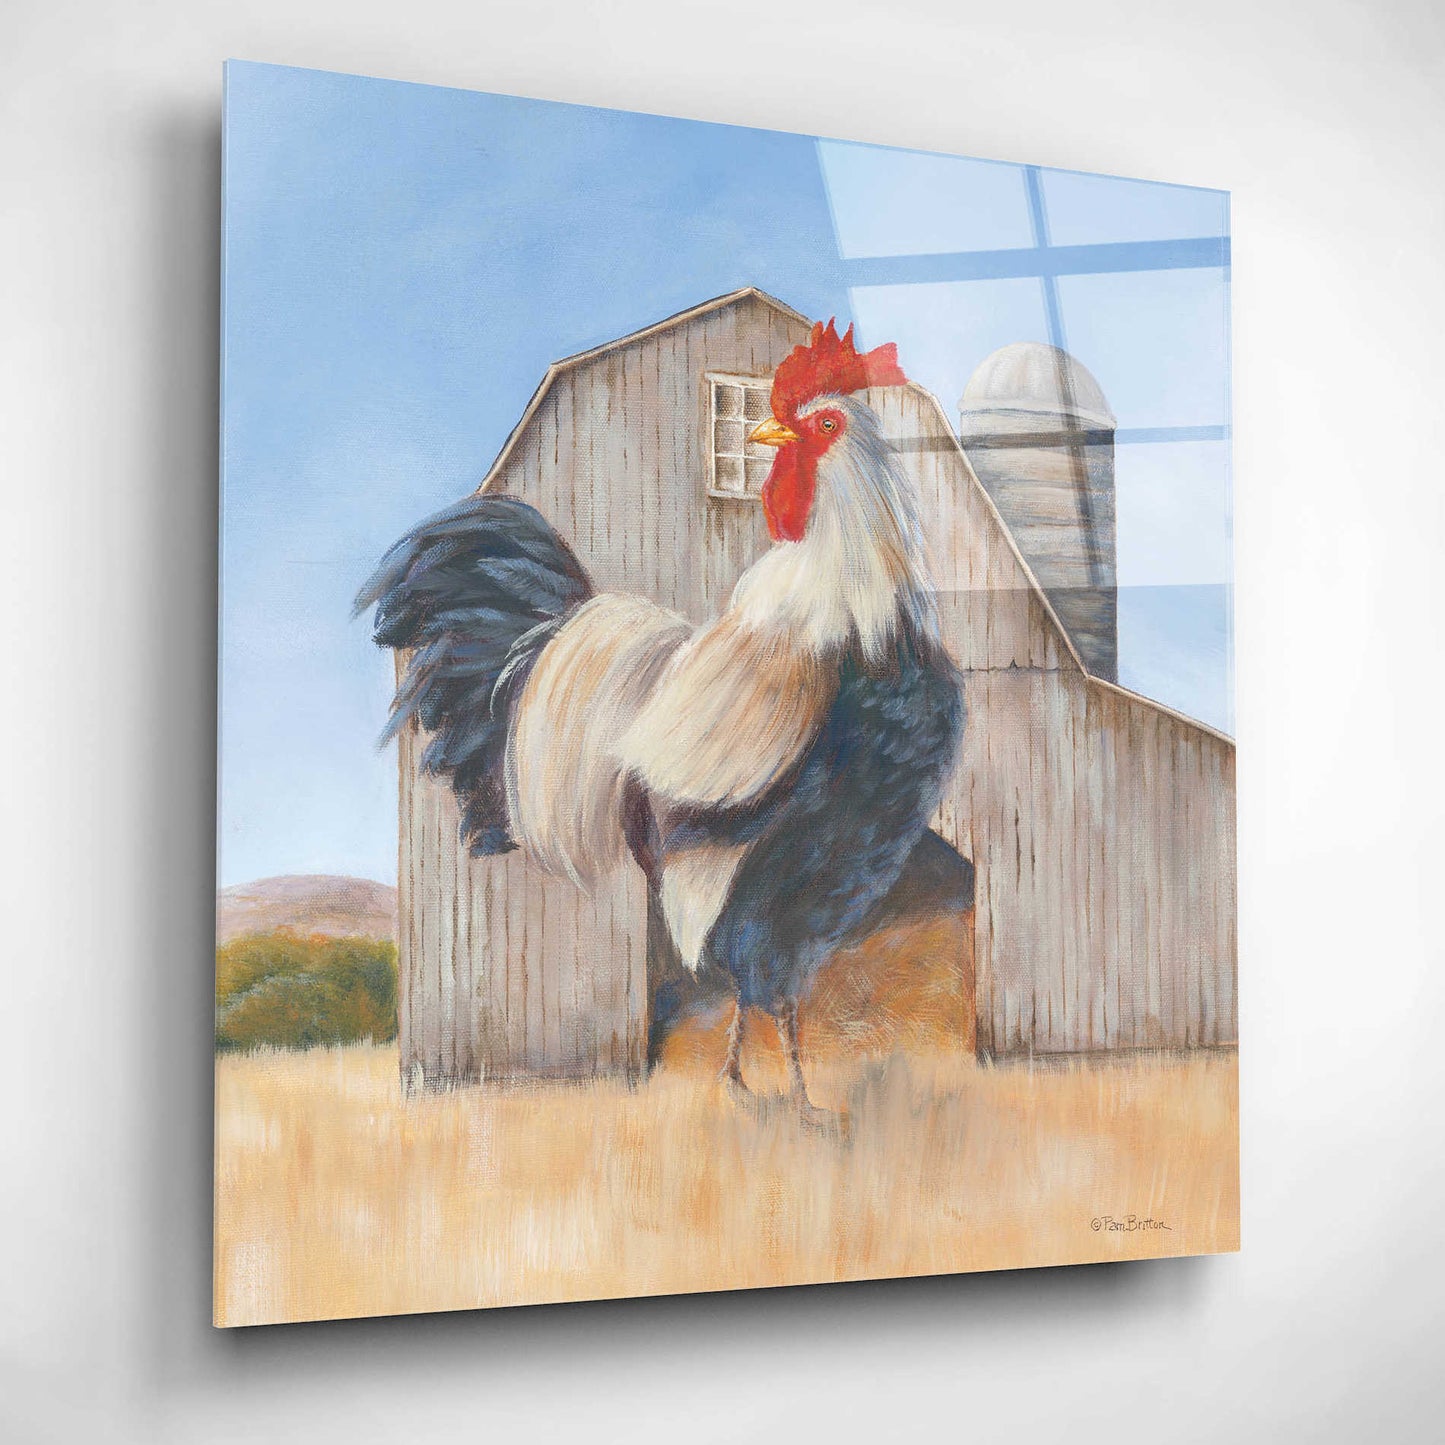 Epic Art 'Country Rooster' by Pam Britton, Acrylic Glass Wall Art,12x12